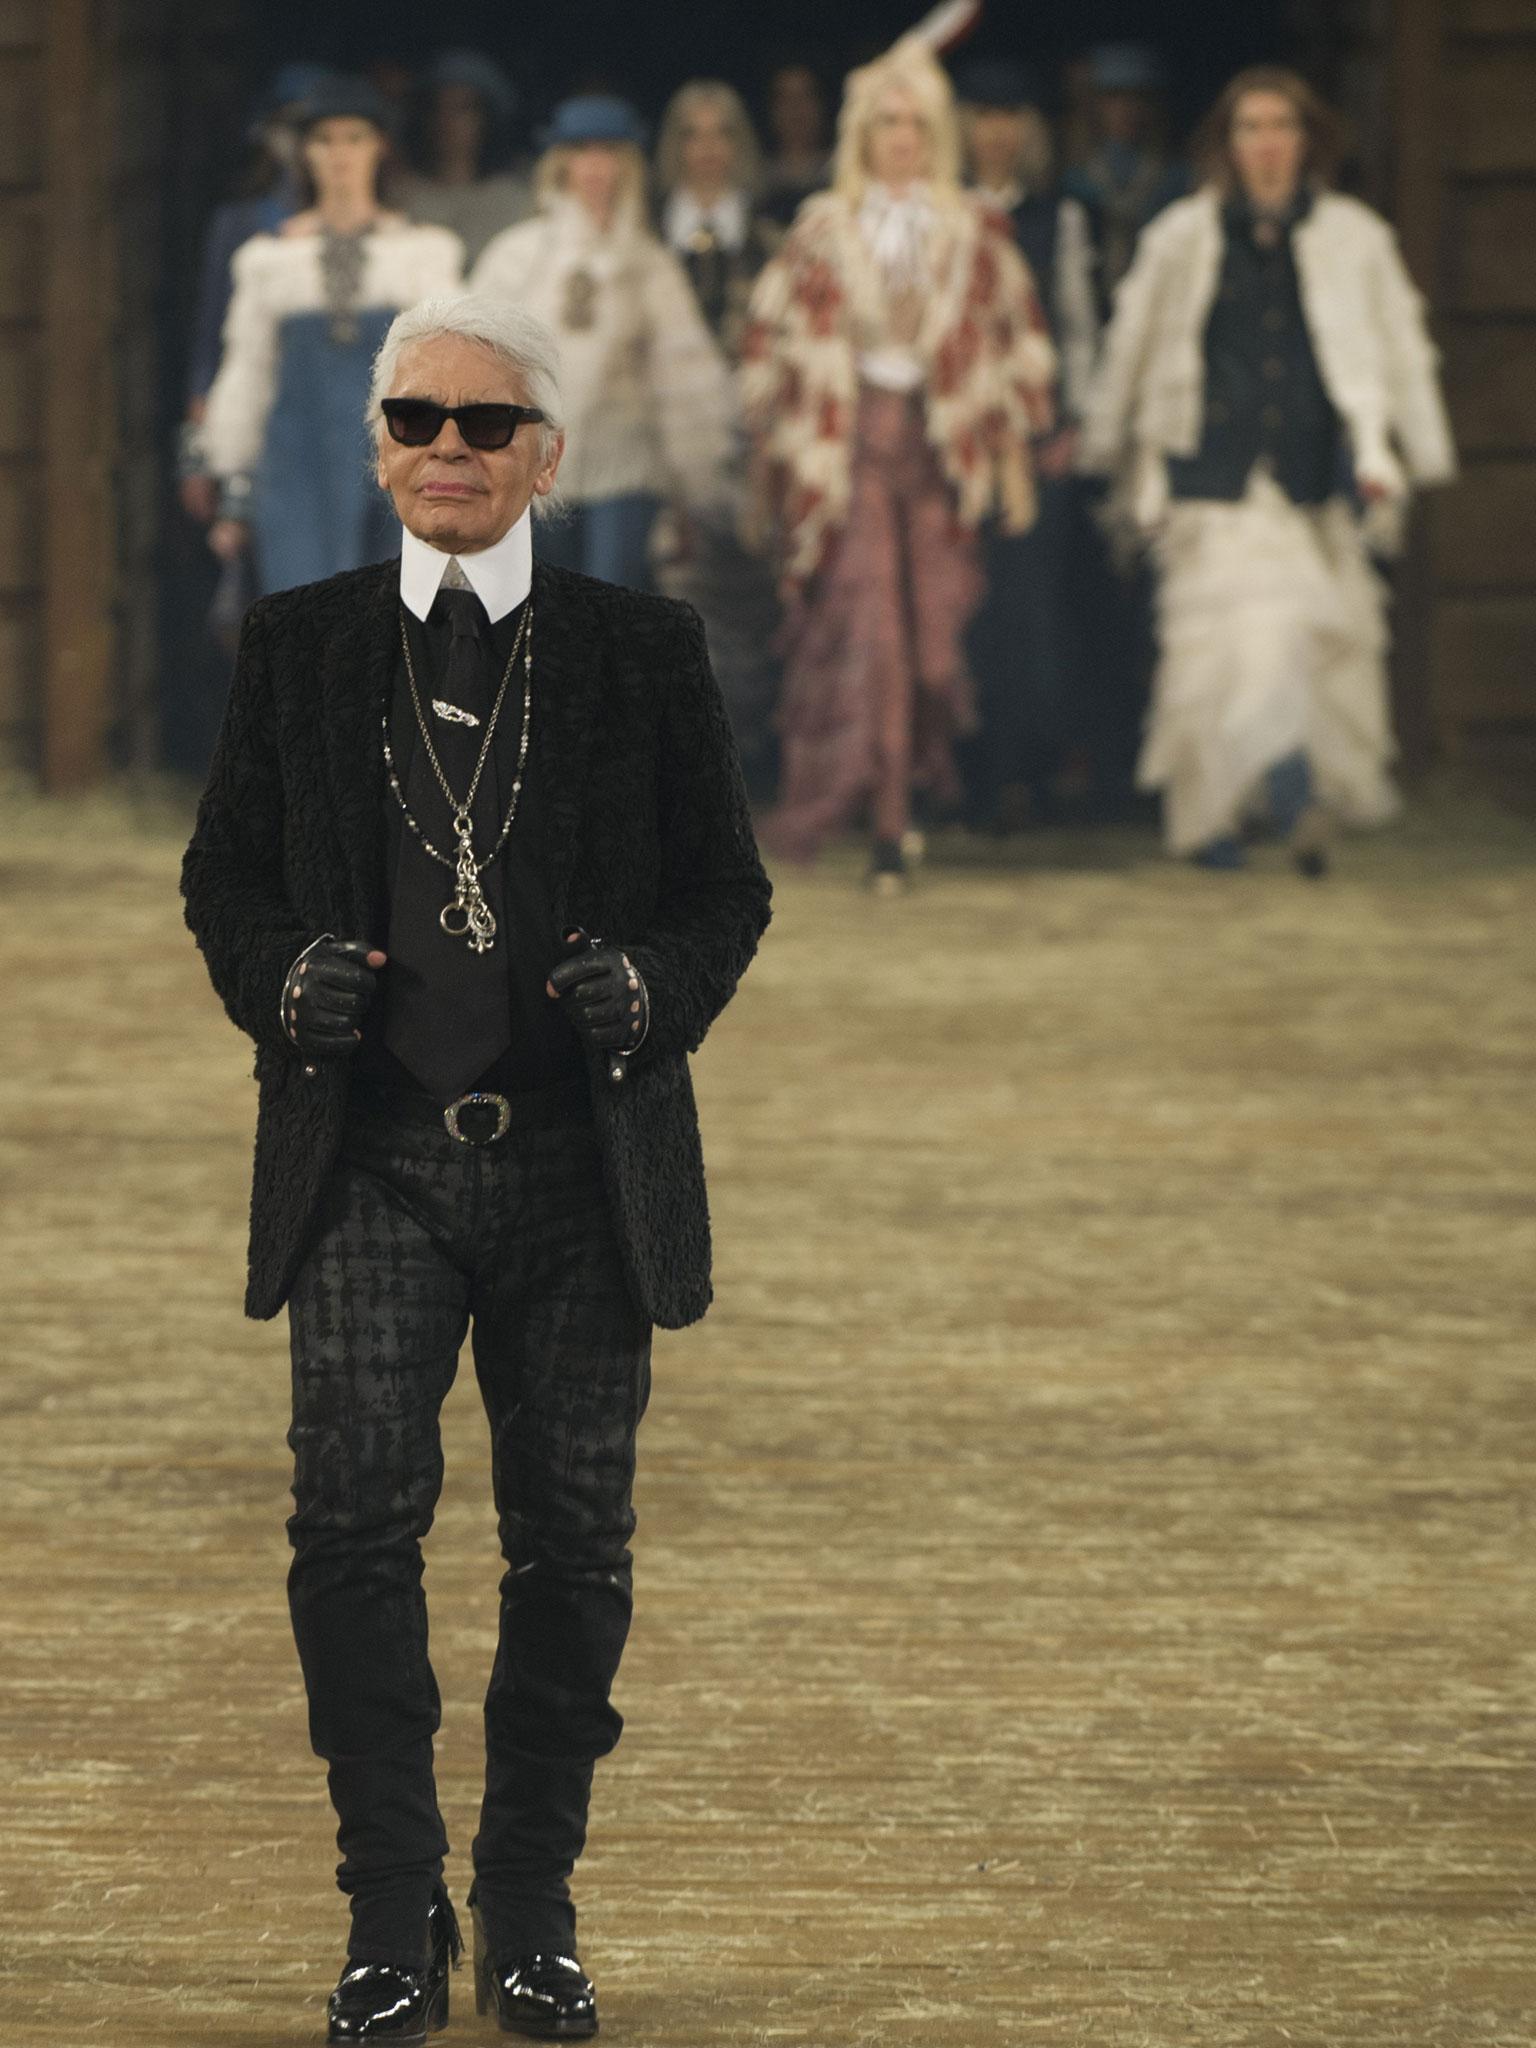 Karl Lagerfeld at the Chanel 'Metiers d'Art' Show at Fair Park in Dallas, Texas